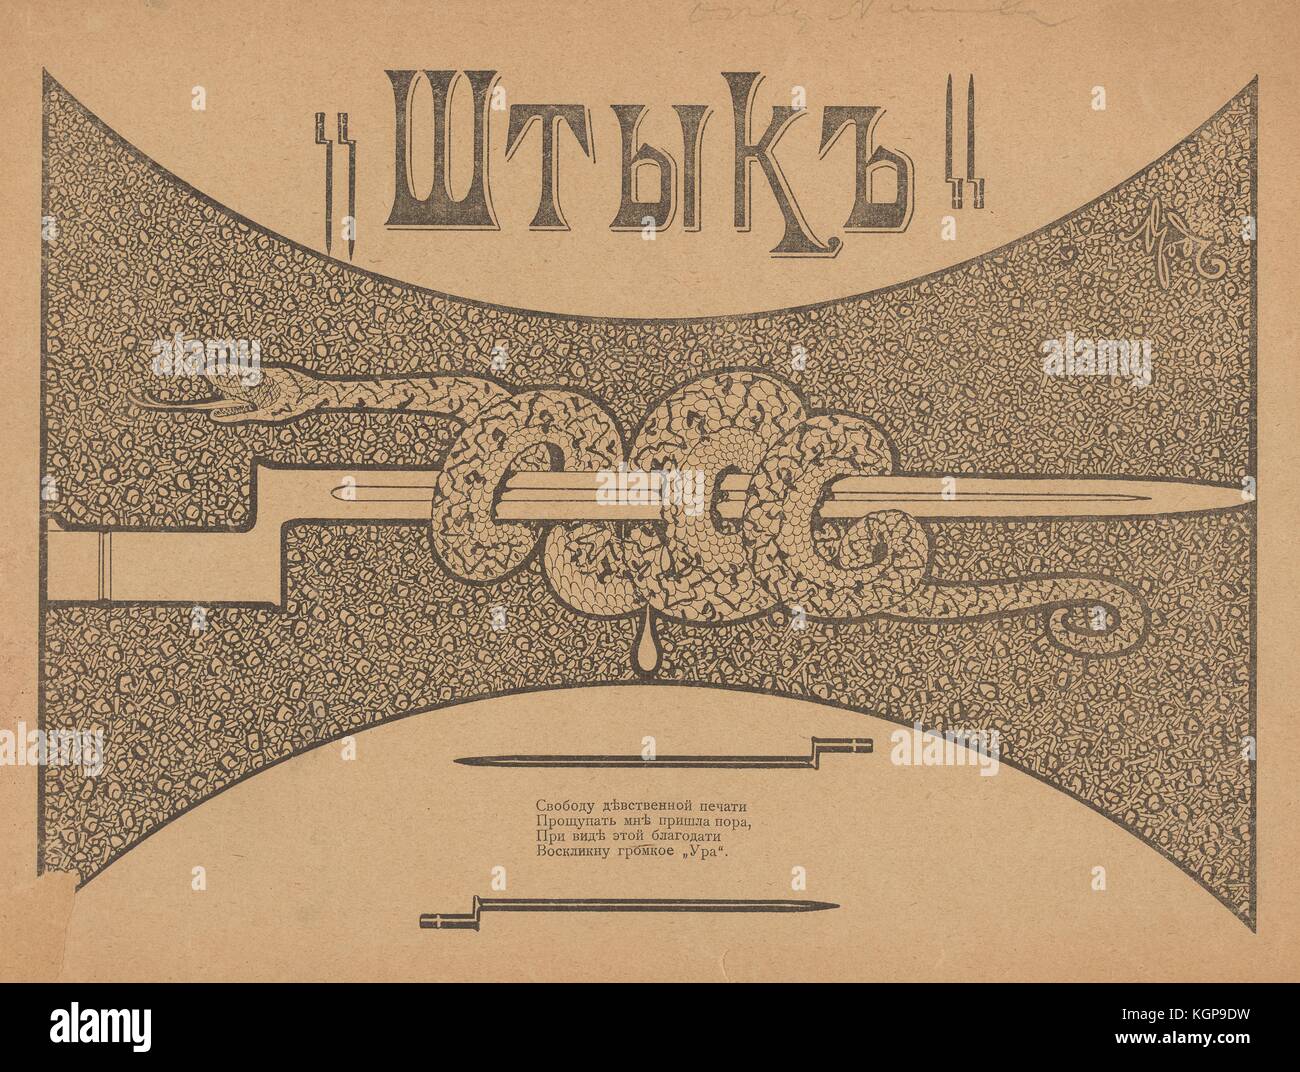 Cover of the Russian satirical journal Shtyk (Bayonet) showing a snake wrapped around and impaled on a bayonet with a drop of blood coming from it, against a patterned background, with a short poem about freedom of the press below, 1906. () Stock Photo